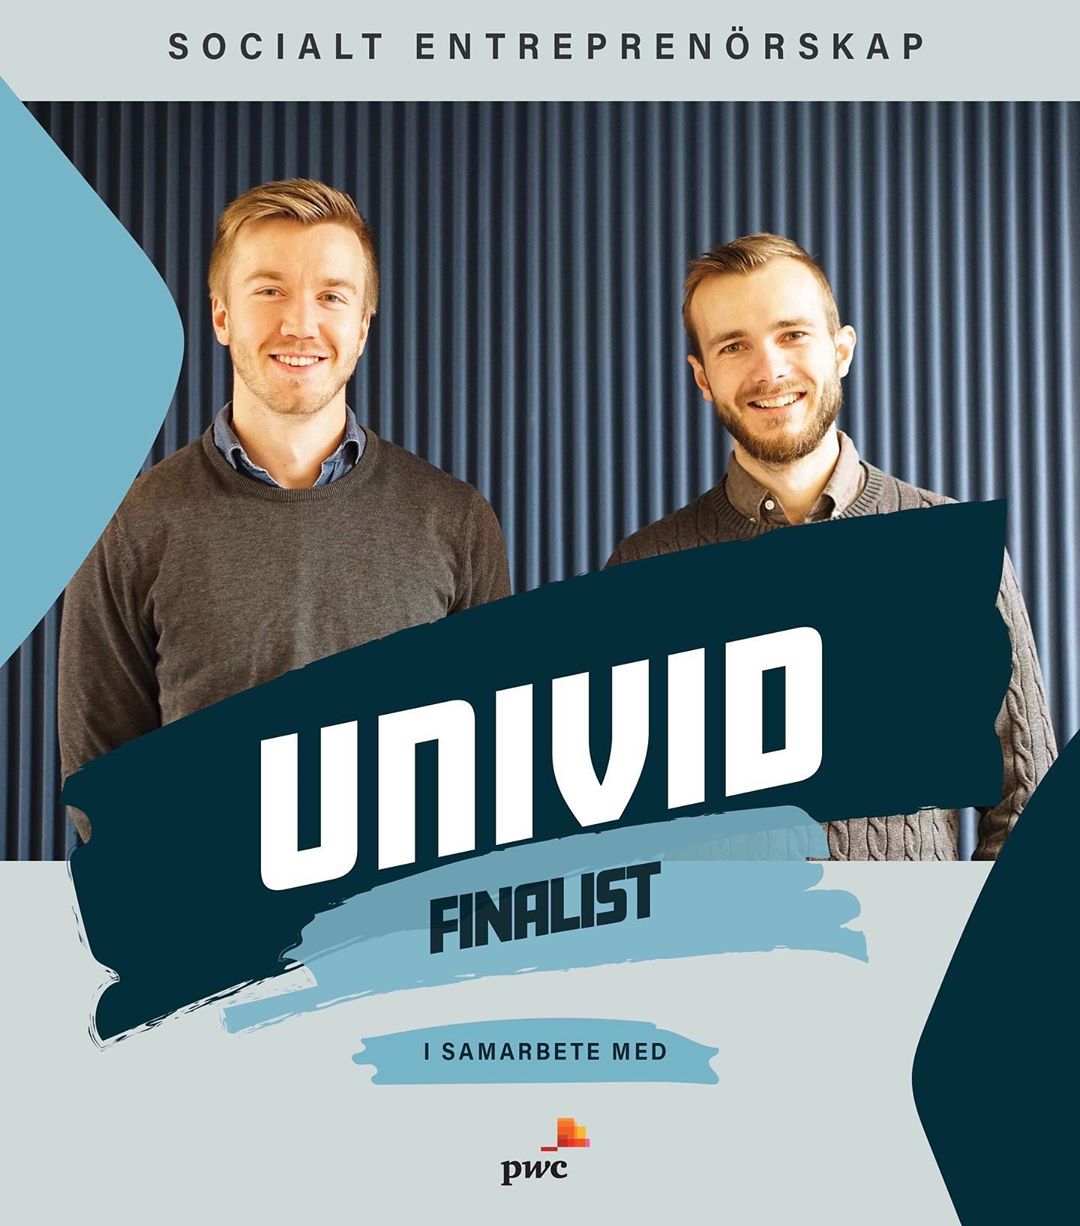 Univid top finalists in the famous startup competition in Sweden - Business Challenge. Univid competes in the Social Entrepreneurship category .